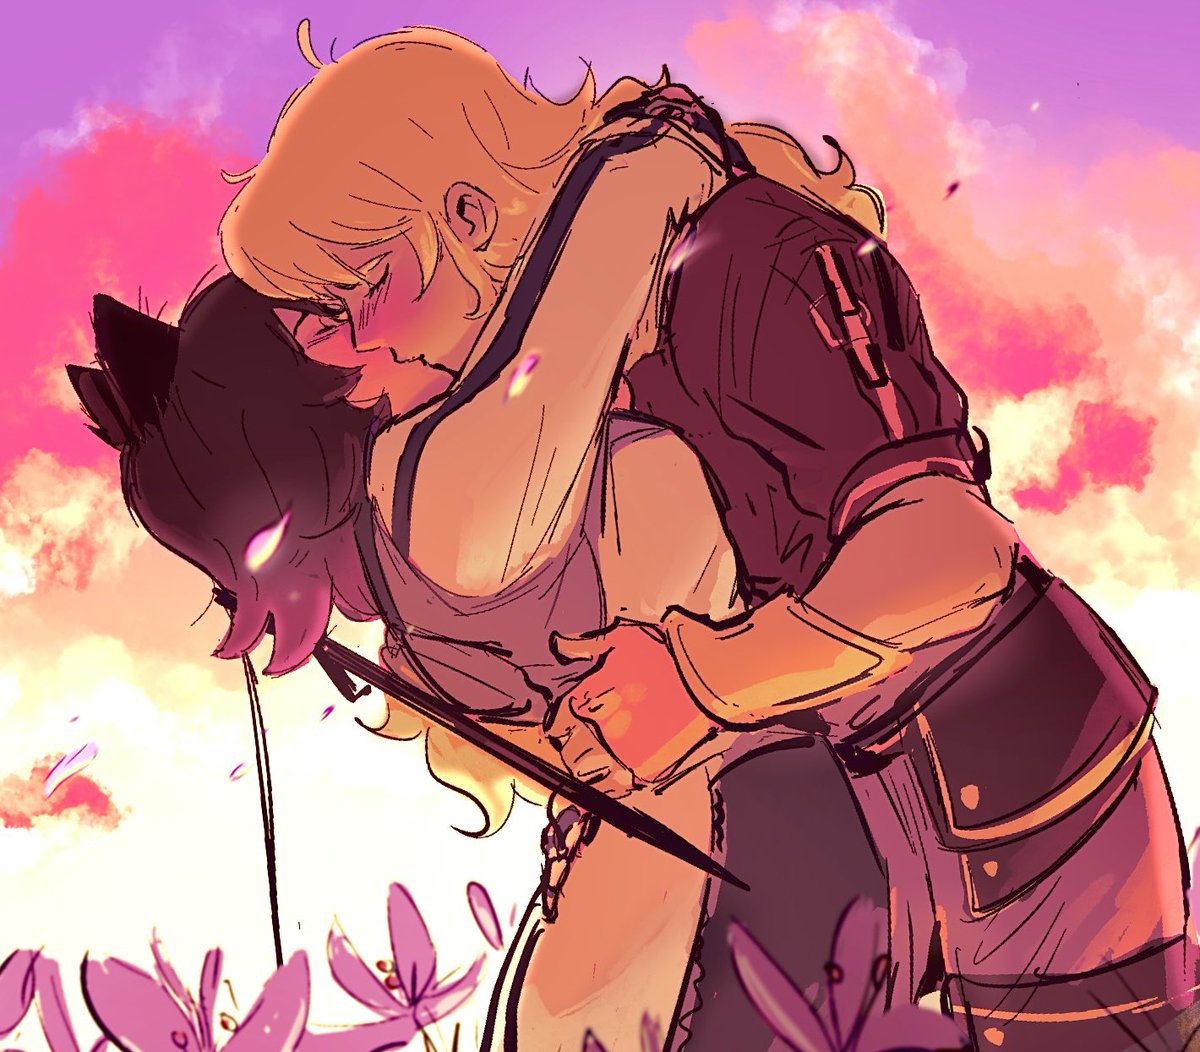 waited every single one of my lives for this moment #RWBY #bumbleby 